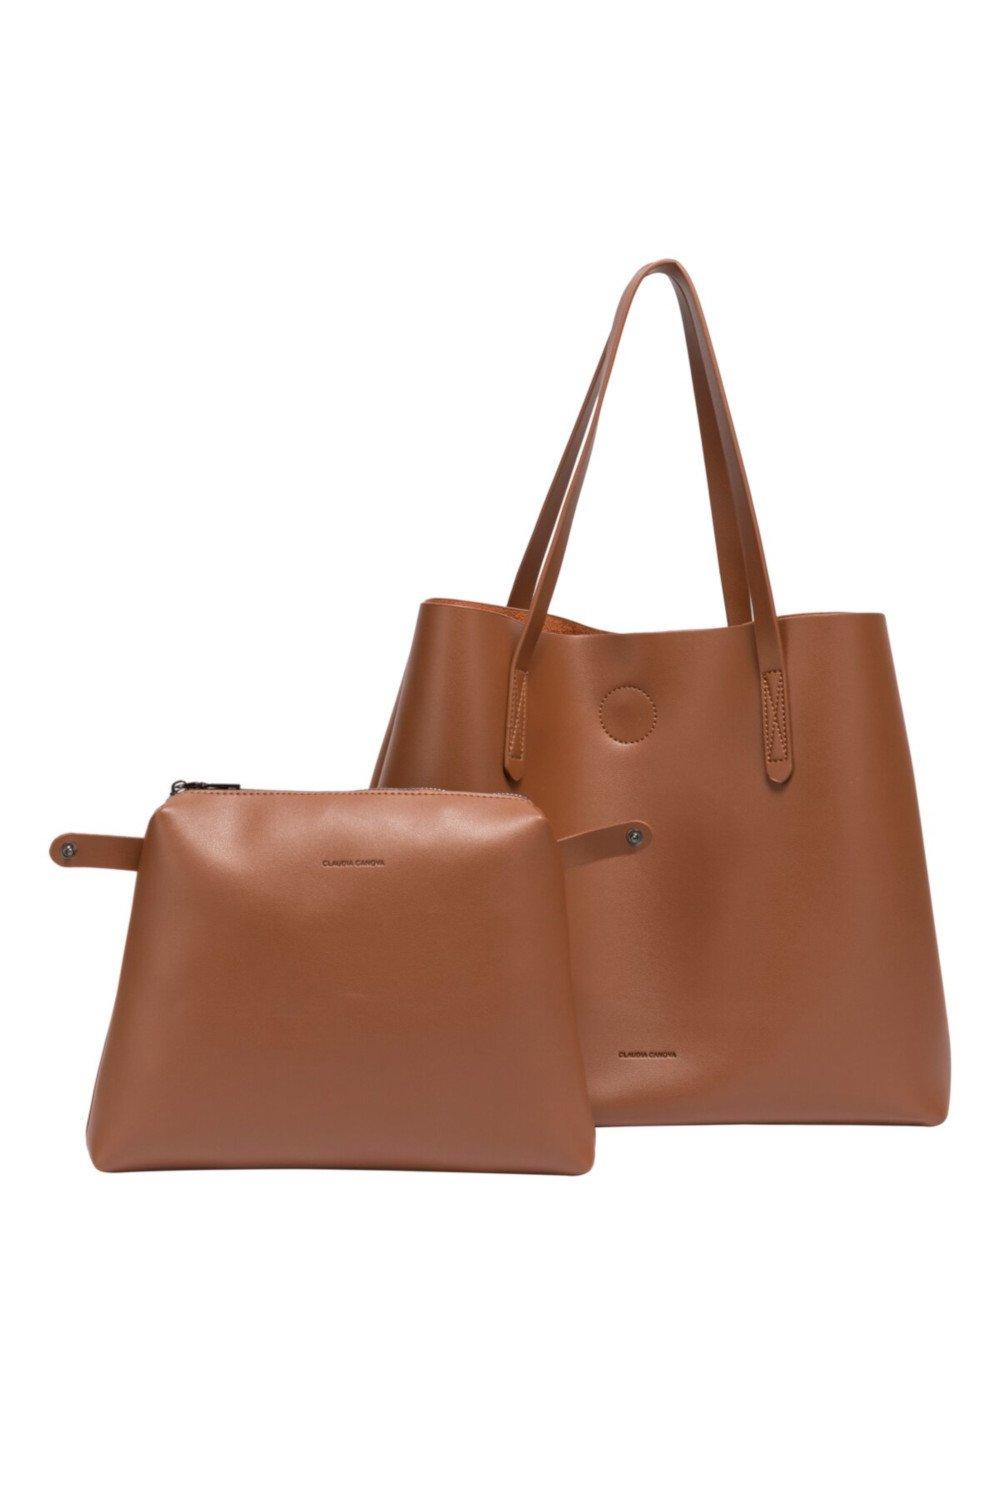 Lichfield Large Leather Buckle Tote Bag, Brown - The Leather Store